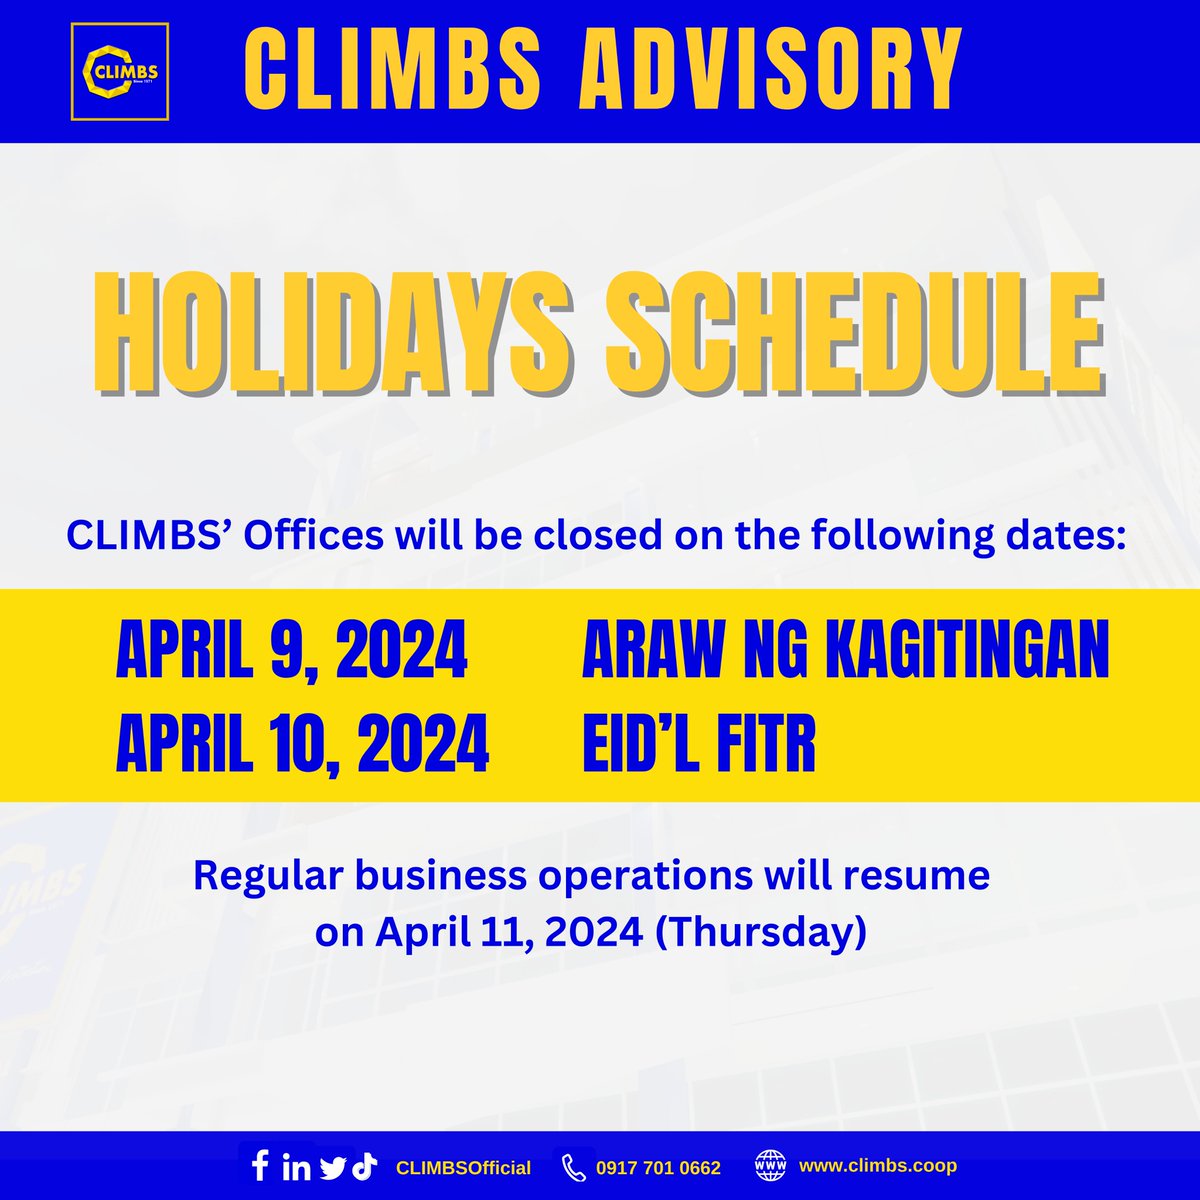 CLIMBS ADVISORY! CLIMBS’ Offices will be closed on the following dates: April 9, 2024: Day of Valor (Araw ng Kagitingan) and April 10, 2024 (Eid’l Fitr). Regular business operations will resume on April 11, 2024 #CLIMBSInsurance #climateinsurance #insuringwhereyouare